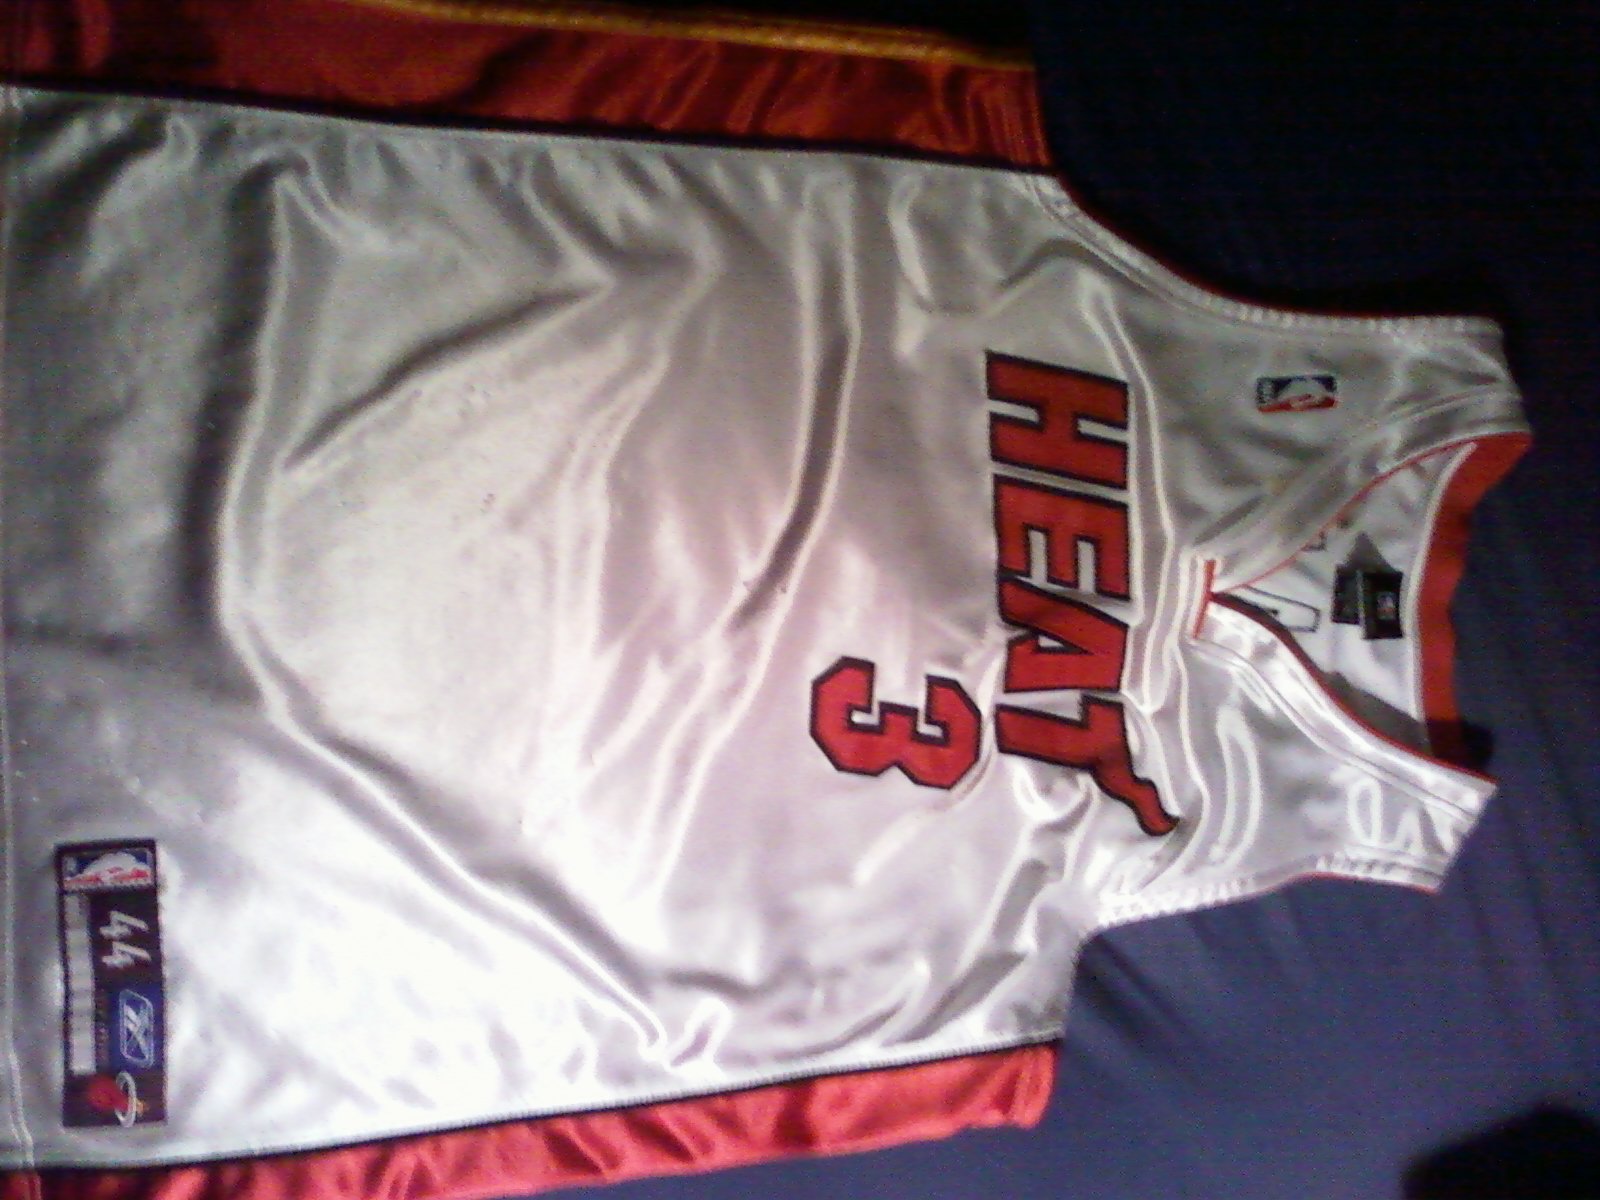 Jersey for trade